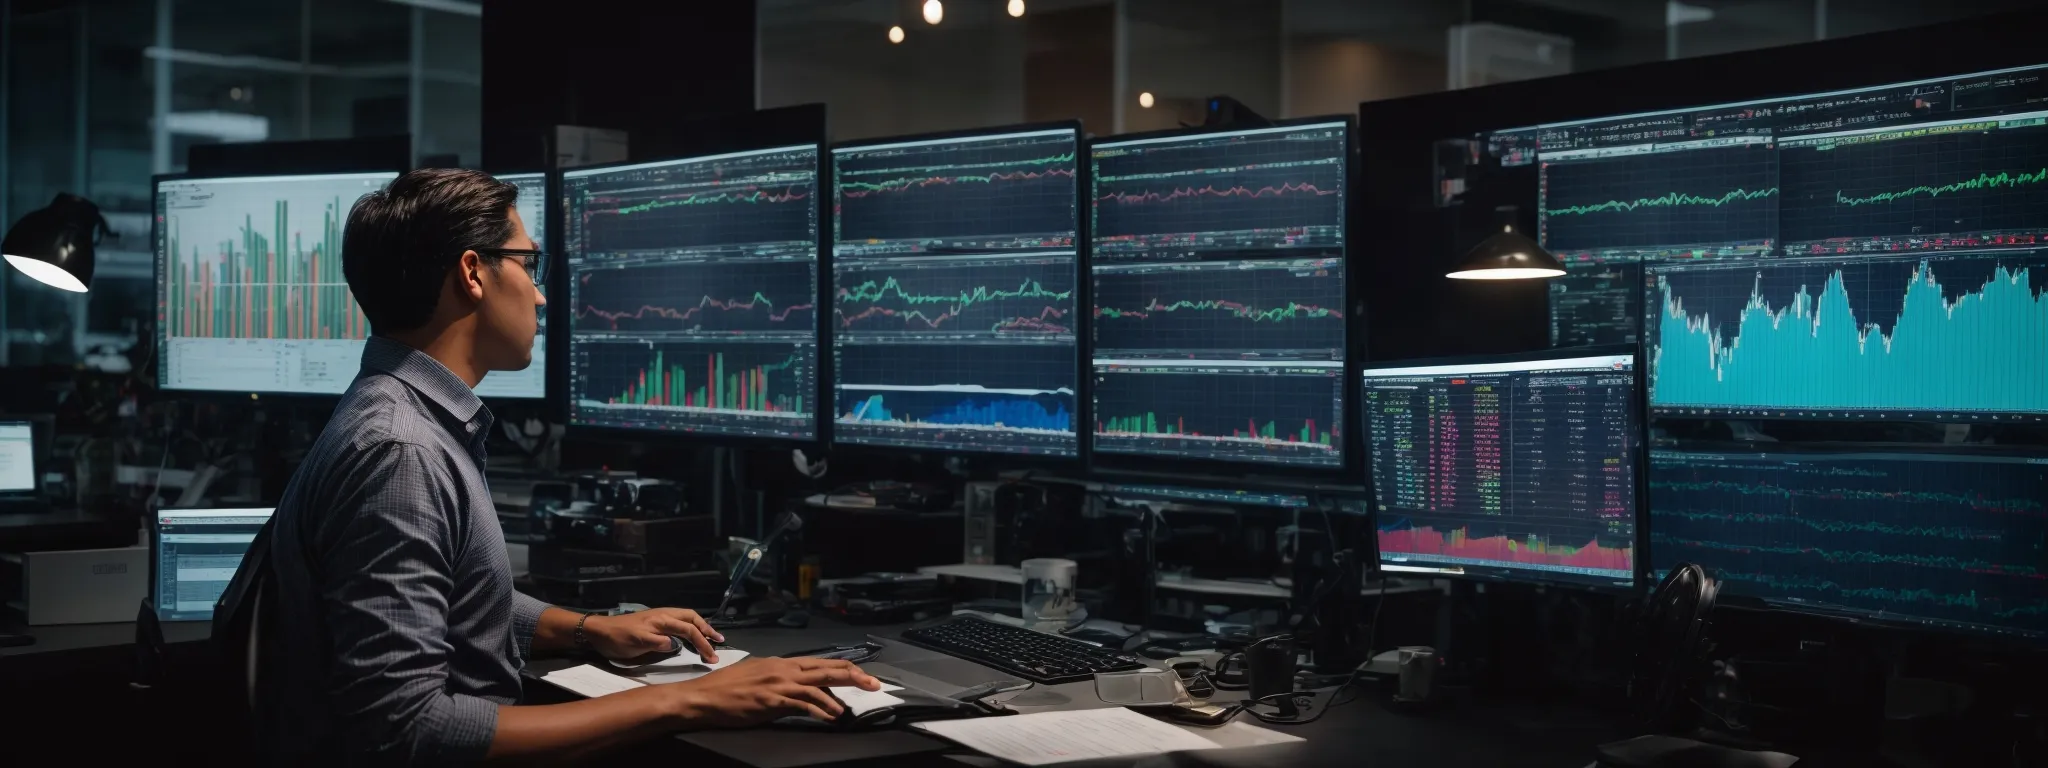 a professional at a desk with multiple monitors displaying colorful analytics charts and graphs related to market research.